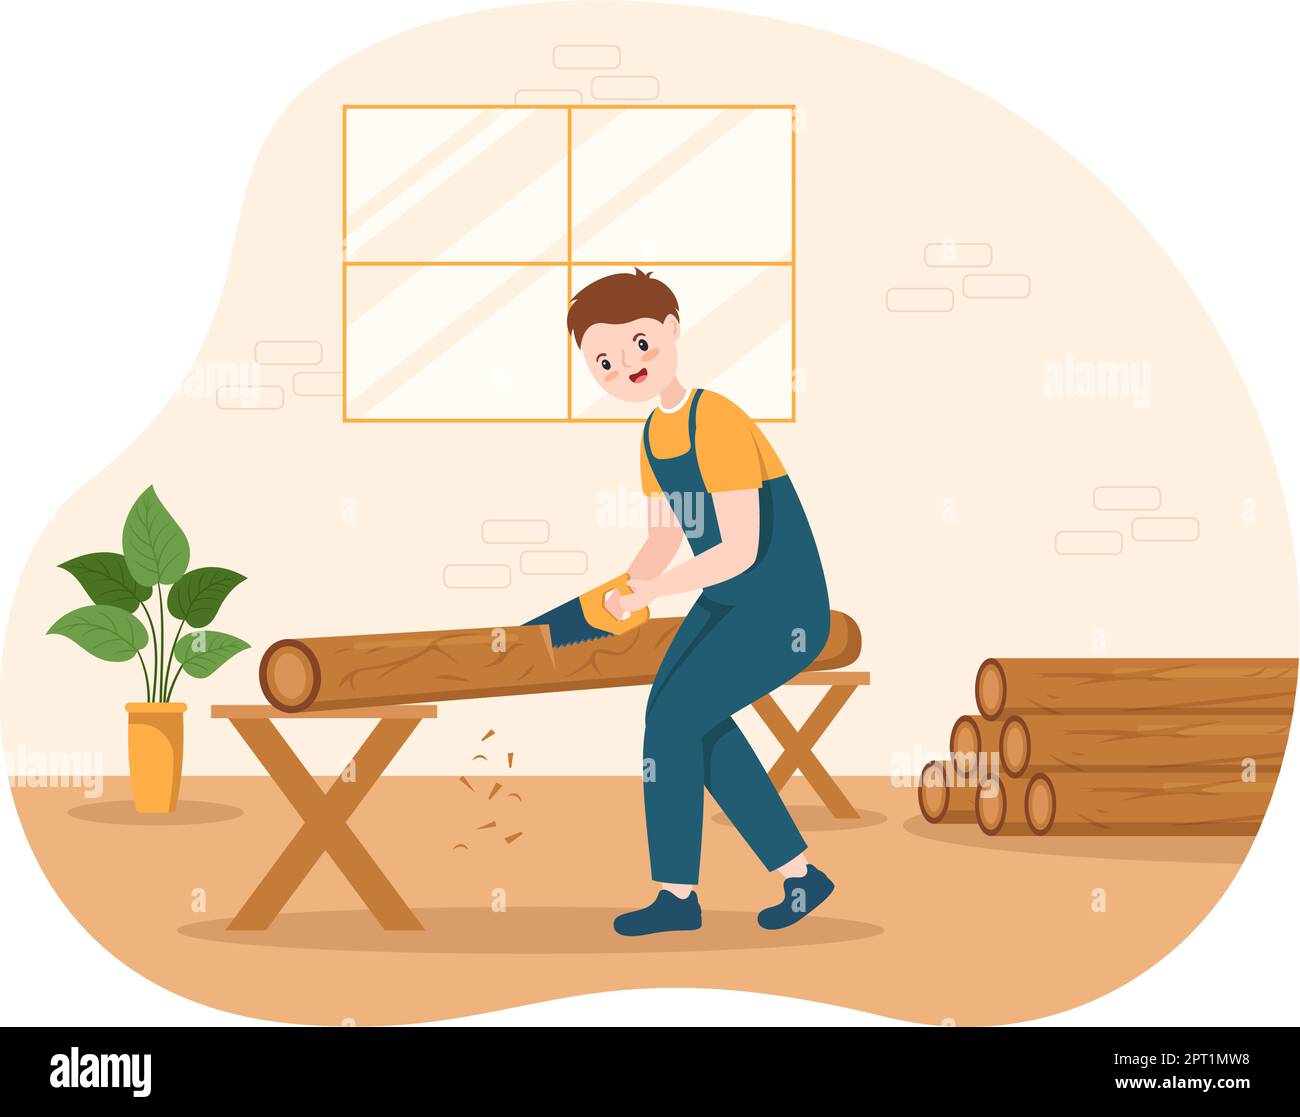 People Tree Cutting and Timber with Truck, Chainsaw Wooden and Tools Logging in the Forest on Flat Cartoon Hand Drawn Templates Illustration Stock Vector